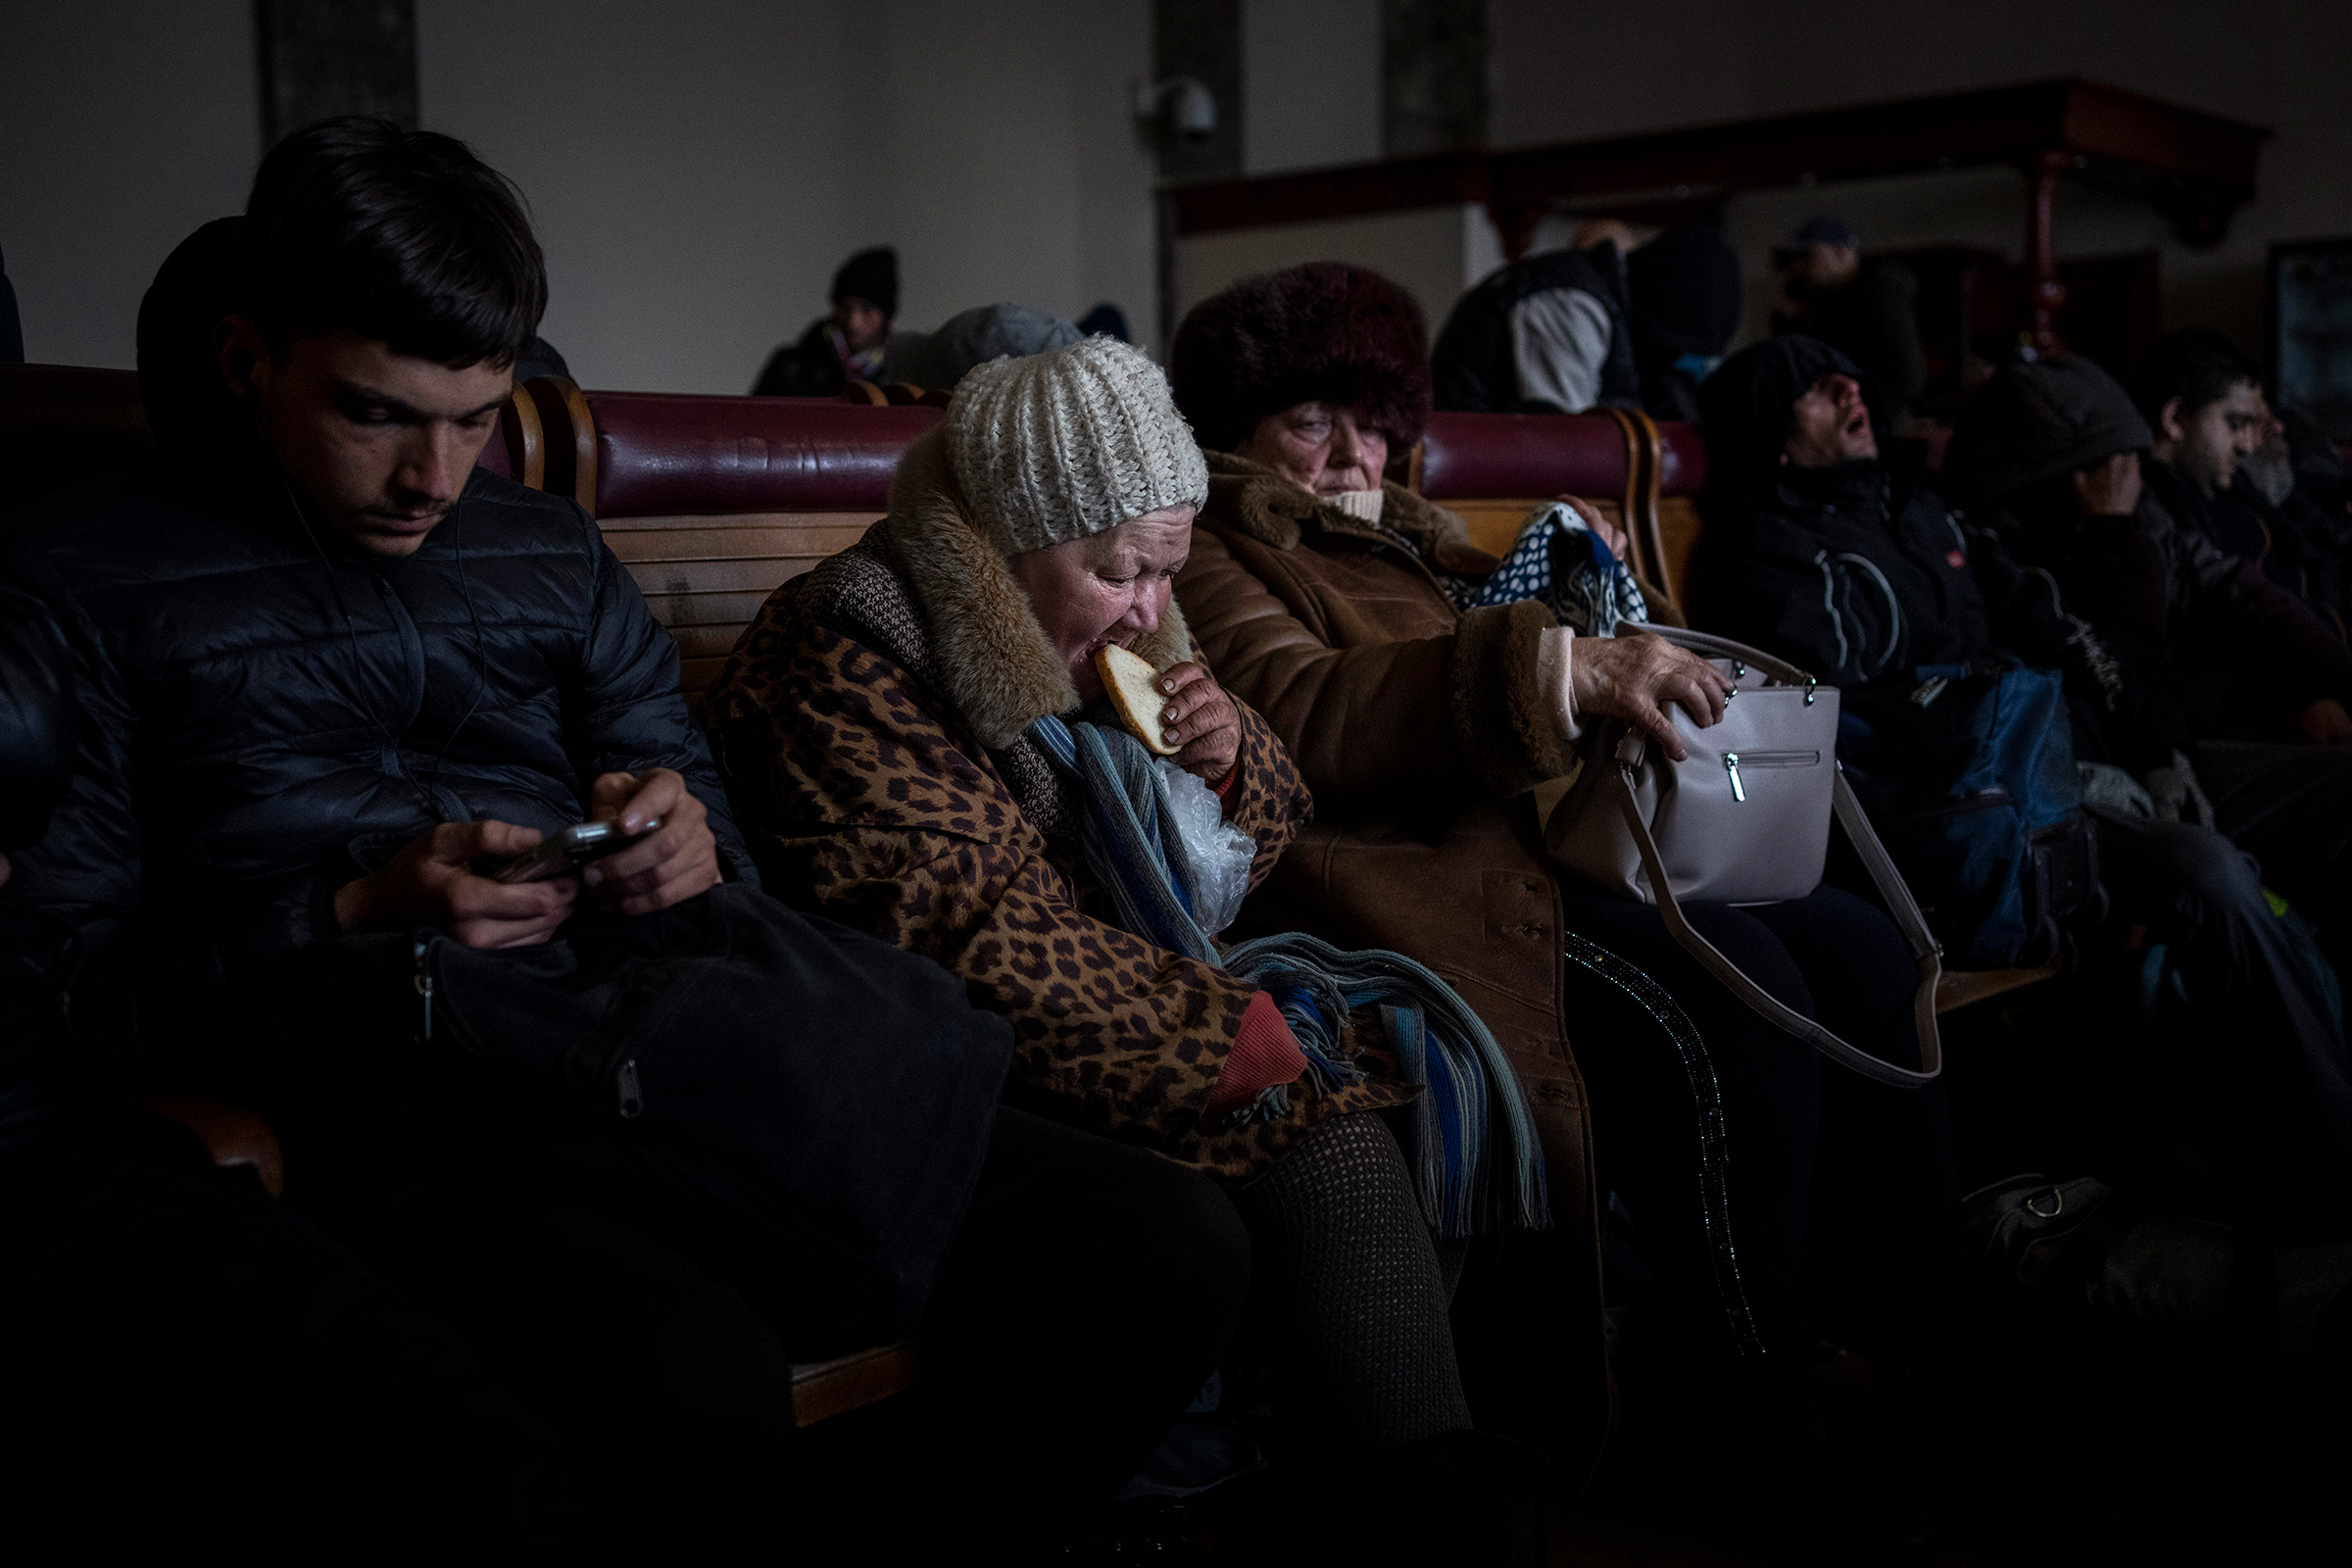 A Ukrainian elderly woman eats a slice of bread inside a crowded Lviv railway station, Feb. 28. Russia's military assault on Ukraine has entered its fifth day, forcing hundreds of thousands of Ukrainians and foreign residents to seek refuge in neighboring countries (Bernat Armangue—AP)